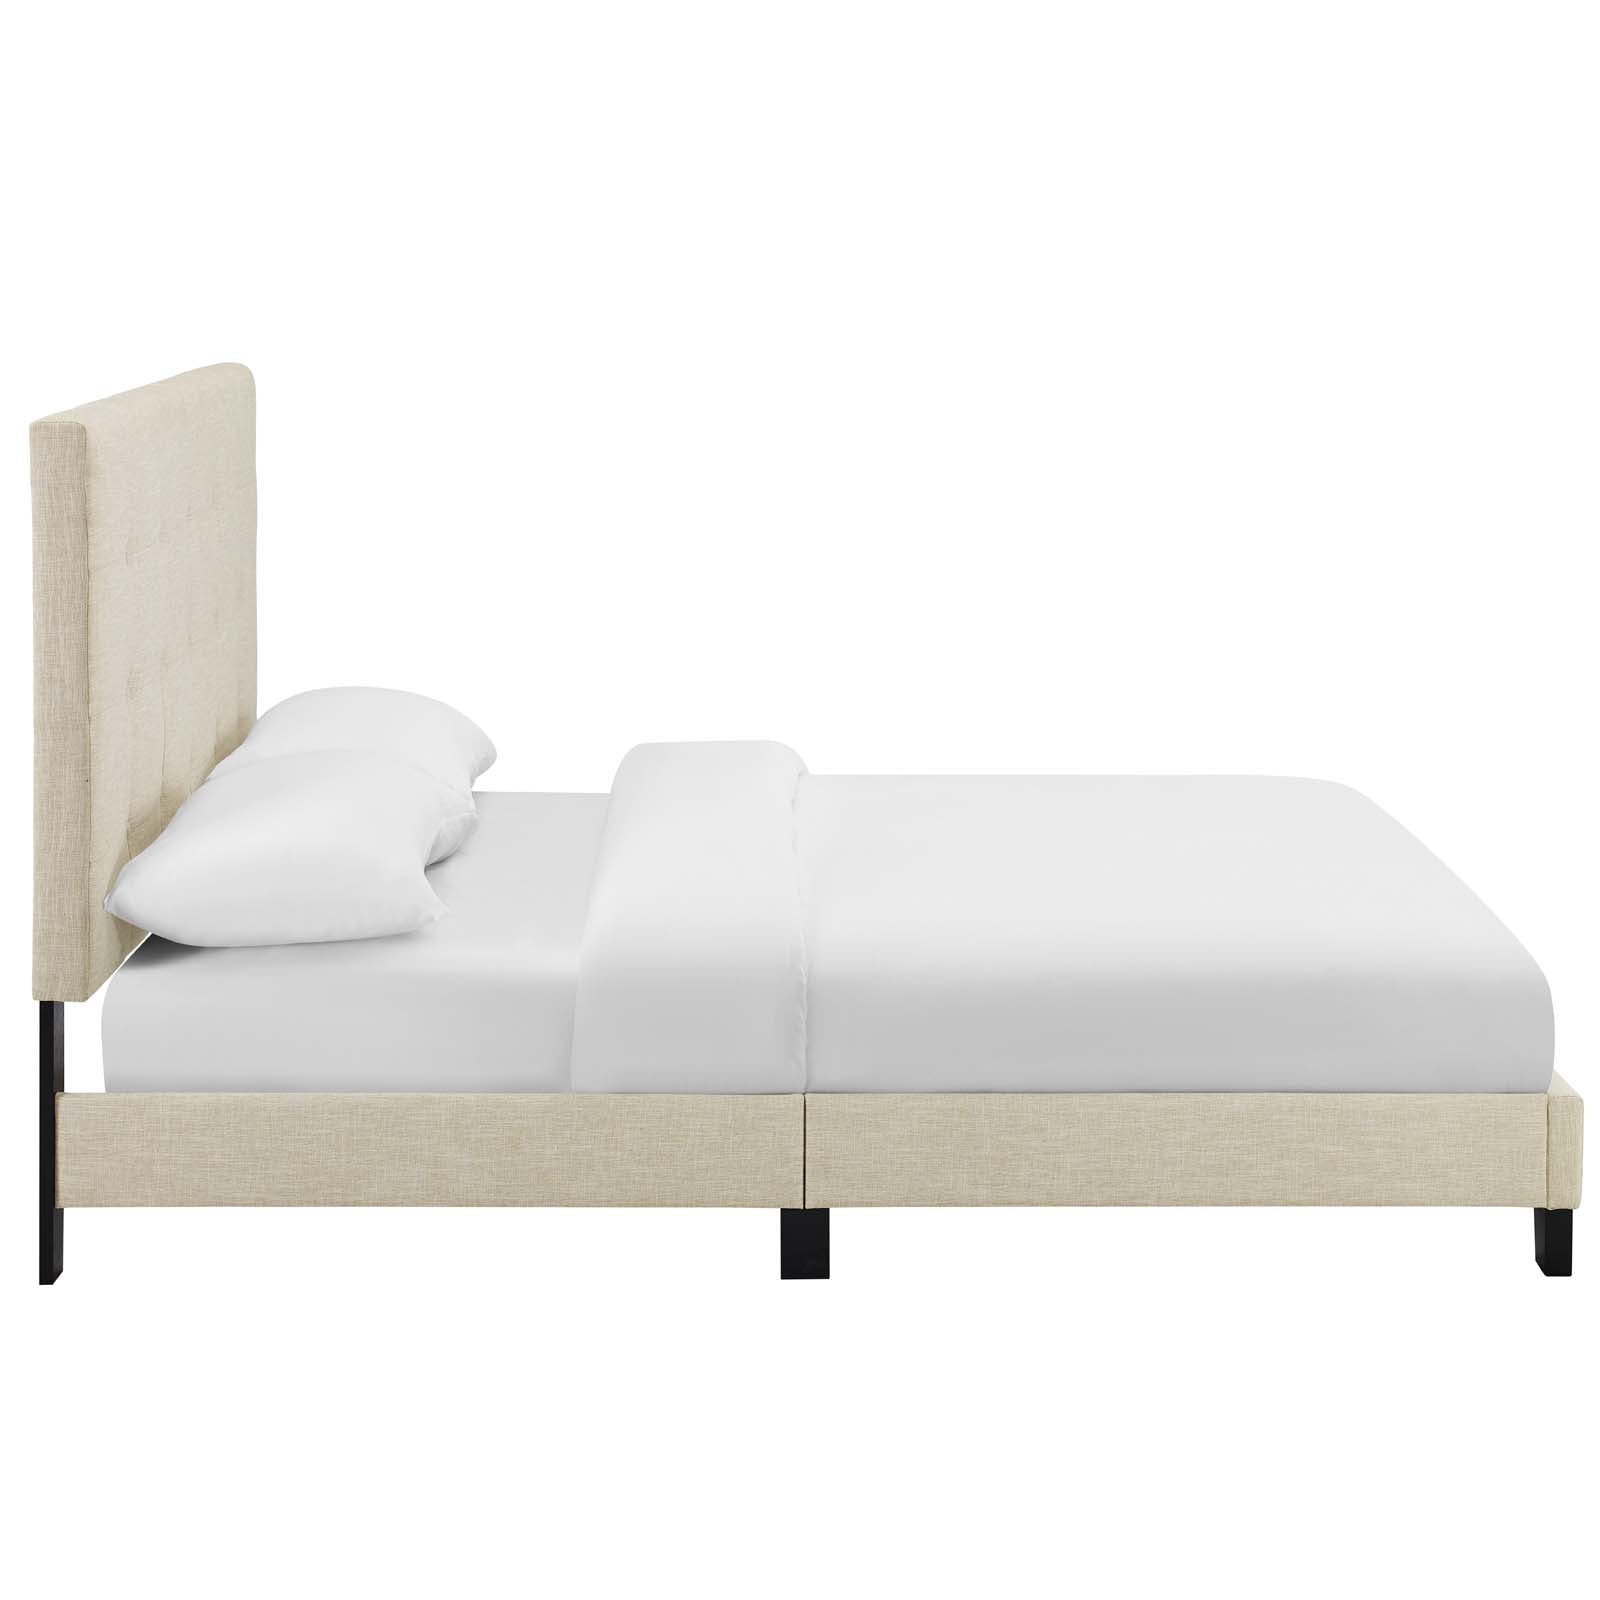 Modway Beds - Melanie Twin Tufted Button Upholstered Fabric Platform Bed Beige